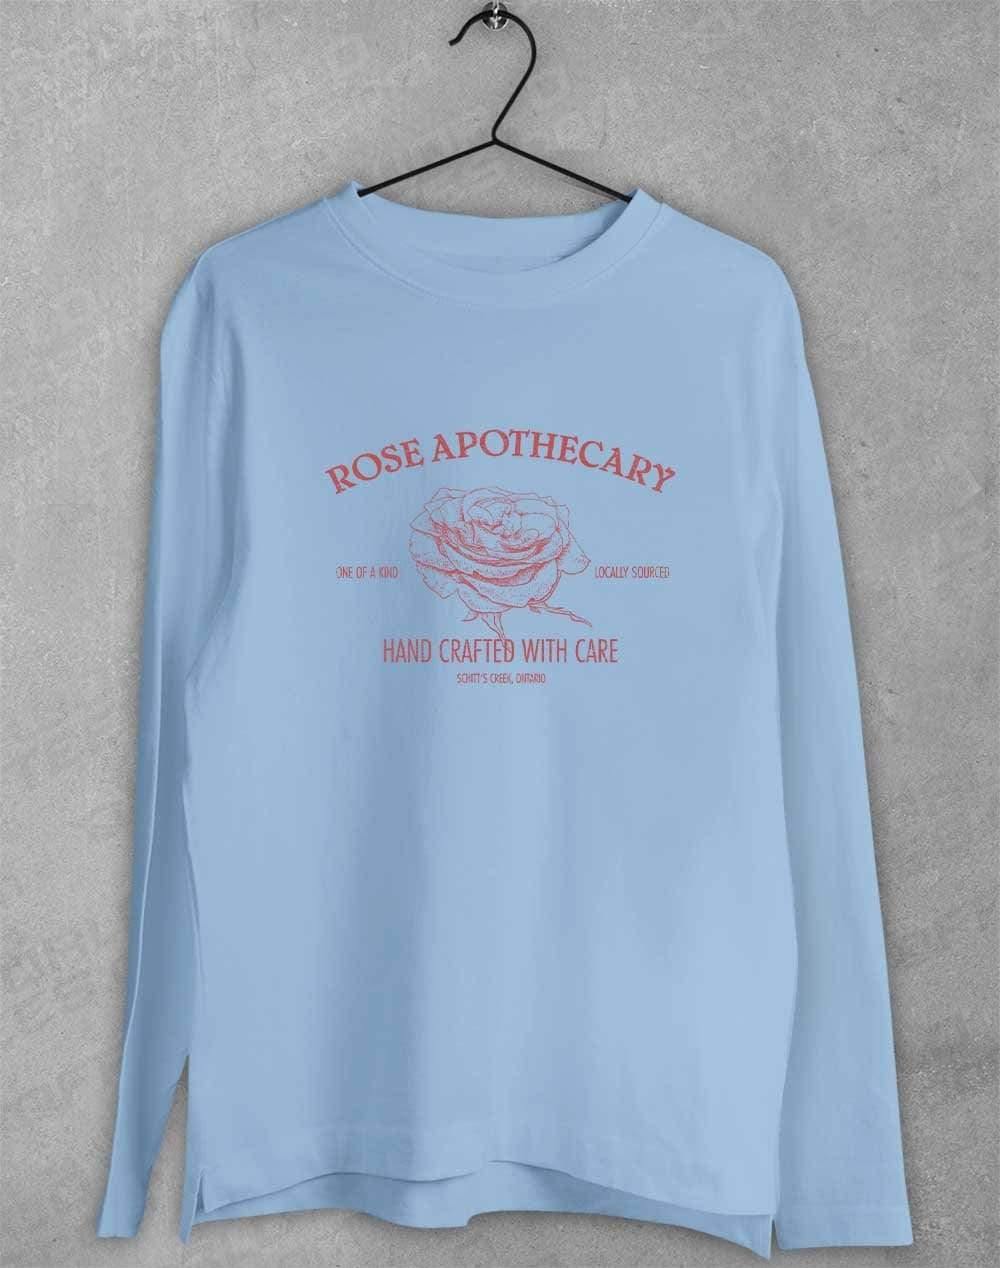 Rose Apothecary Long Sleeve T-Shirt S / Light Blue  - Off World Tees